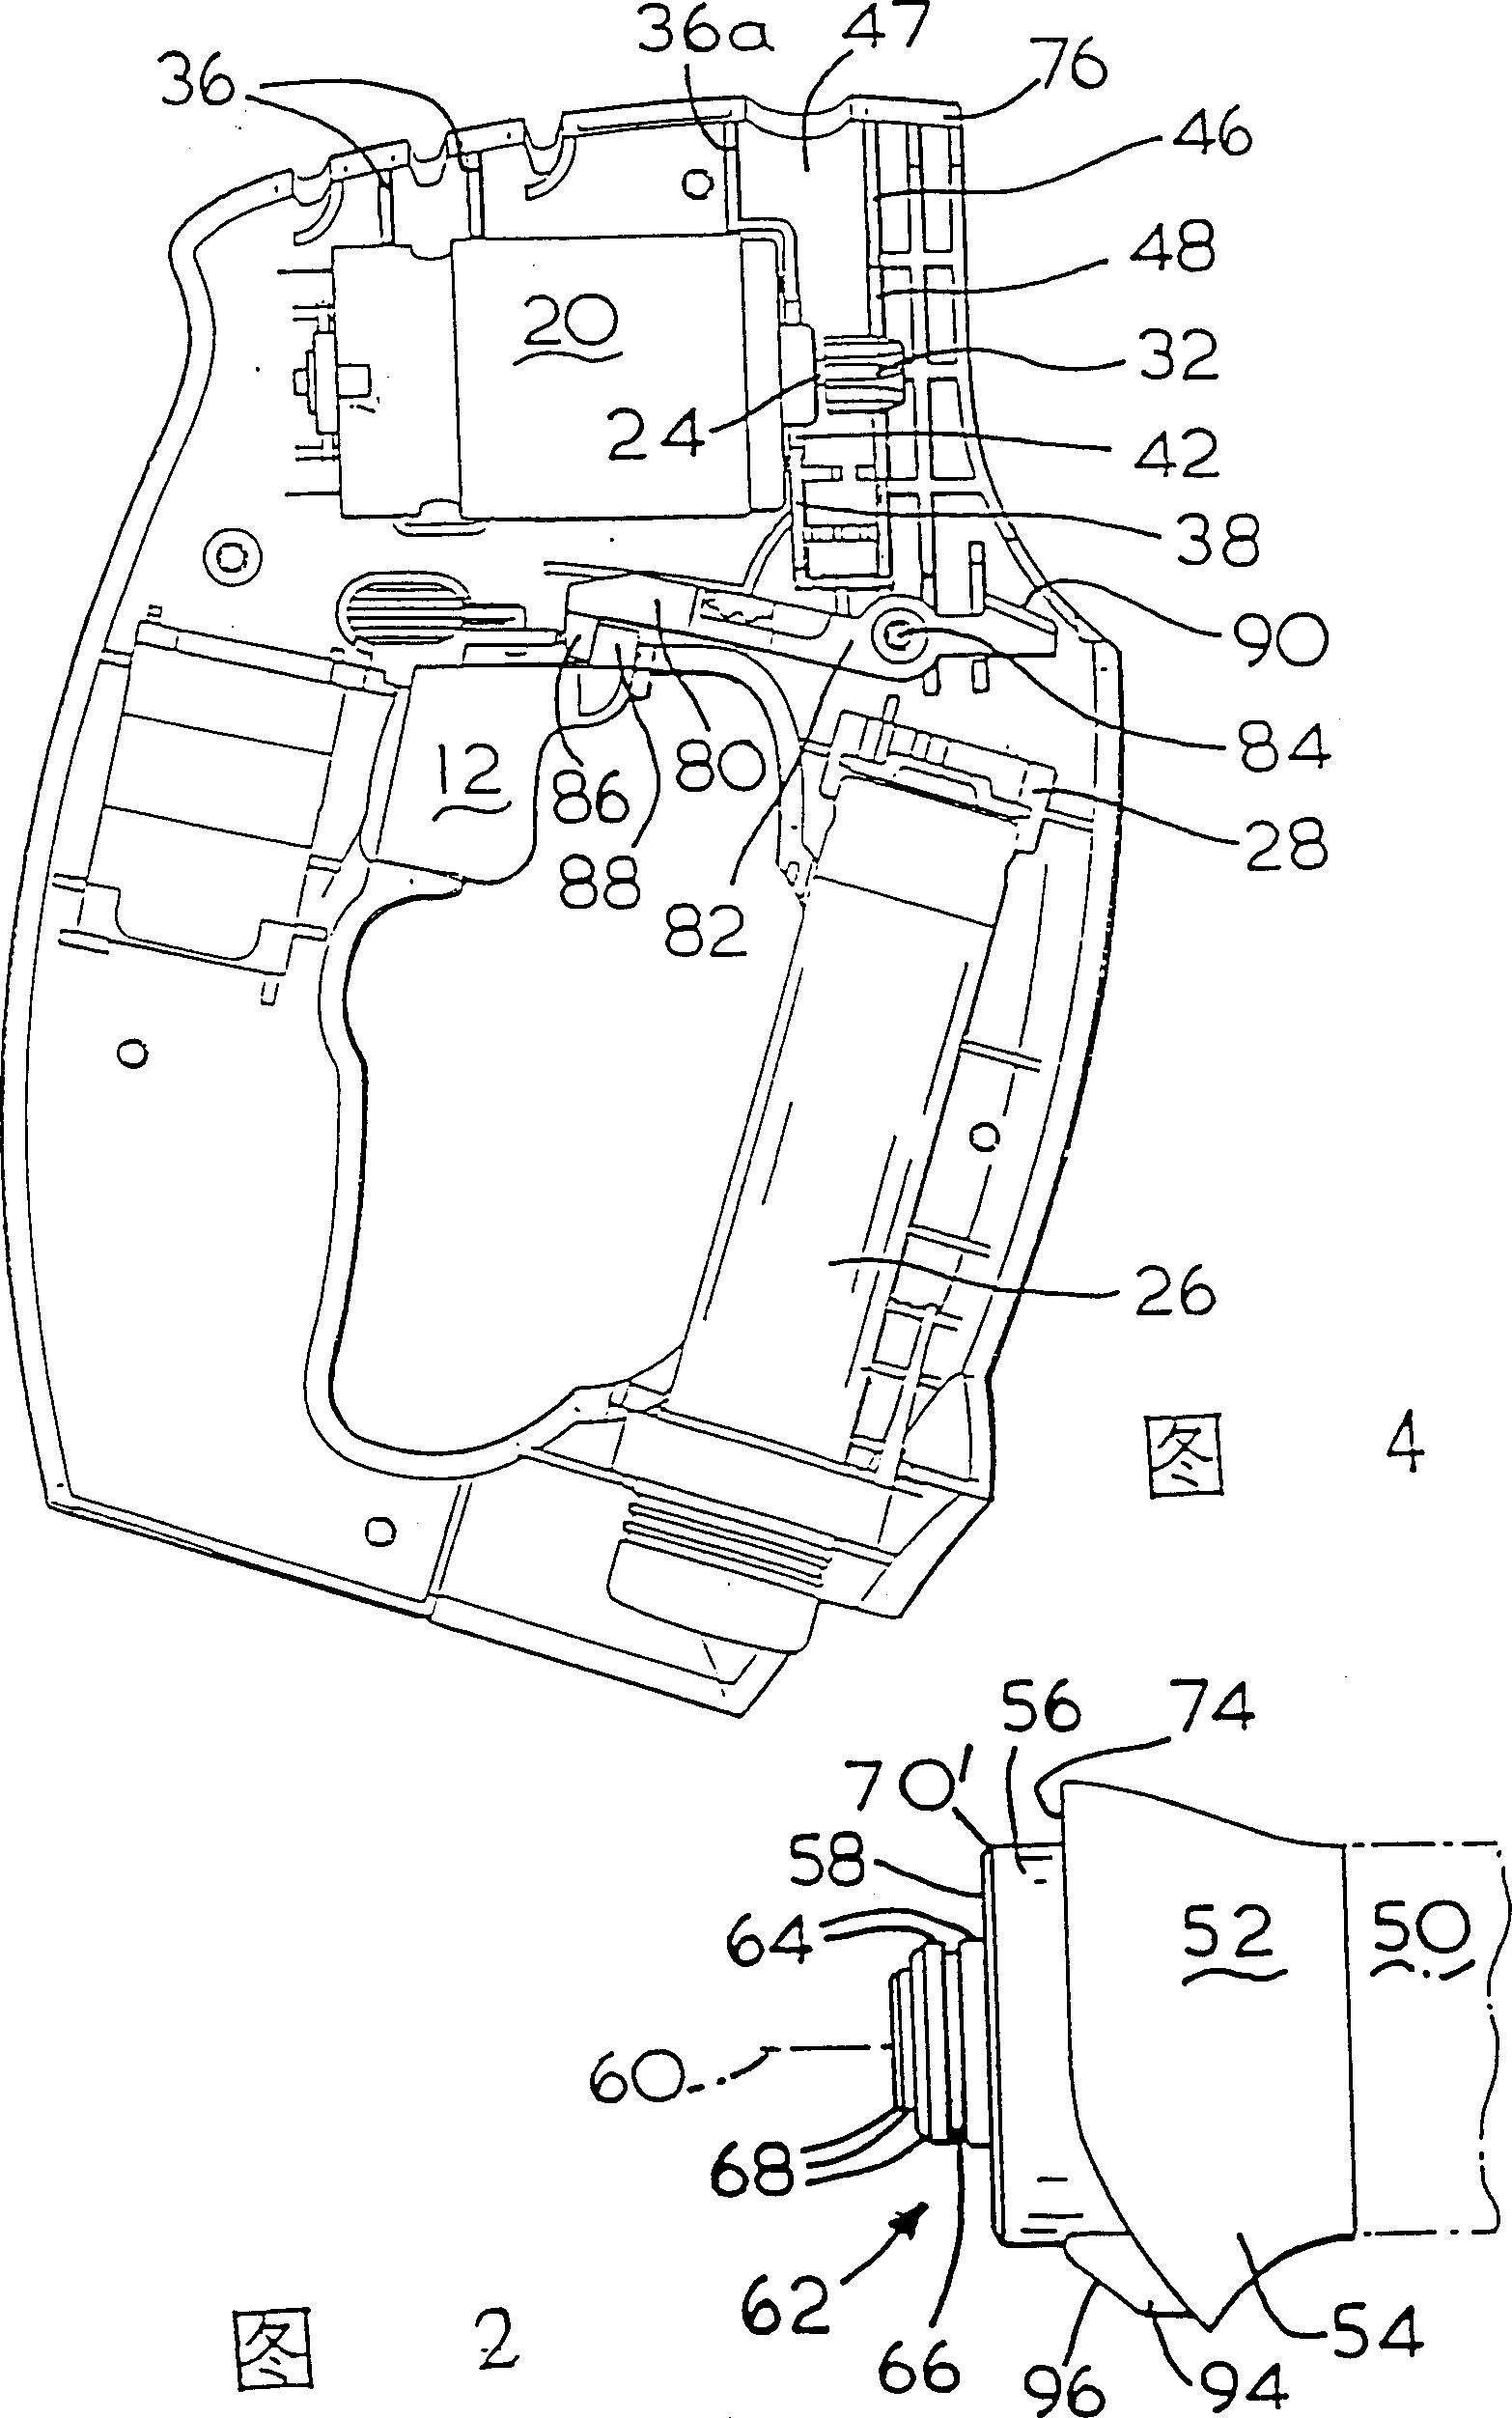 Electric tool with interchangeable tool post